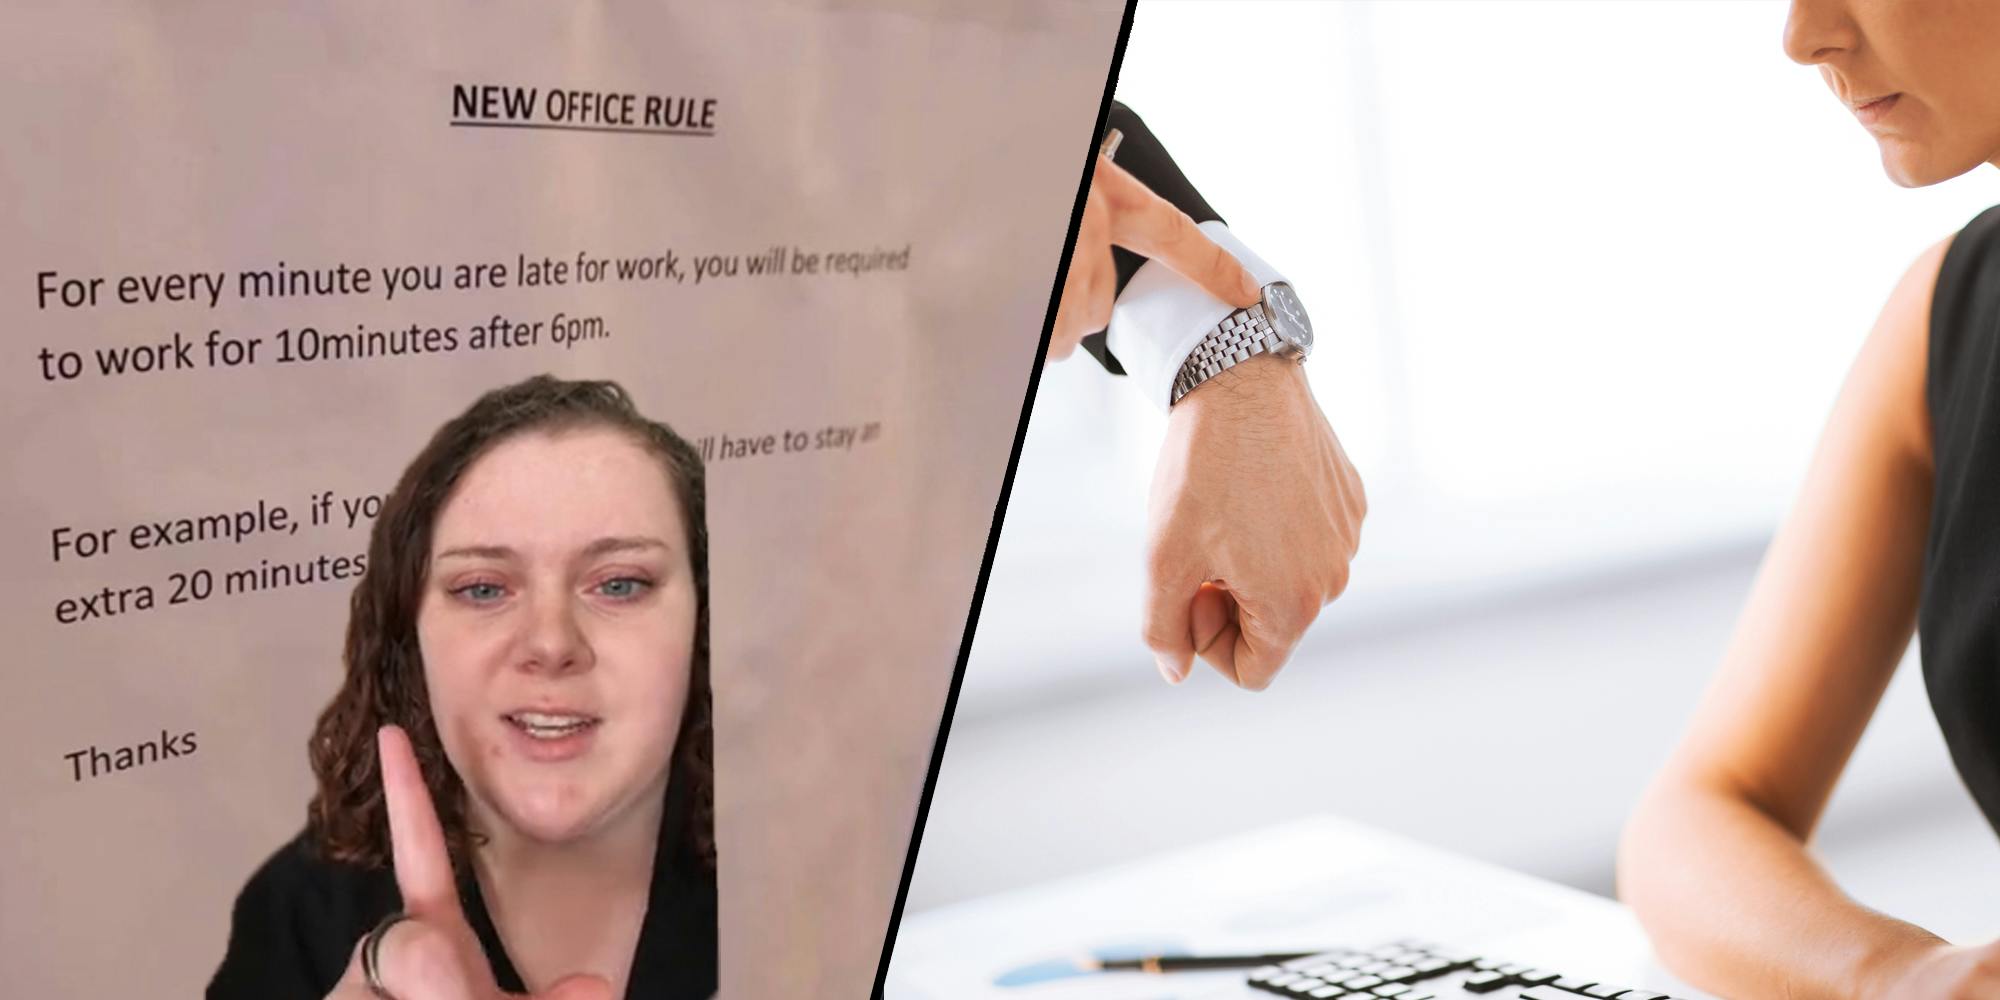 woman greenscreen TikTok over image of "NEW OFFICE RULE" poster (l) boss pointing to watch at office job with coworker (r)